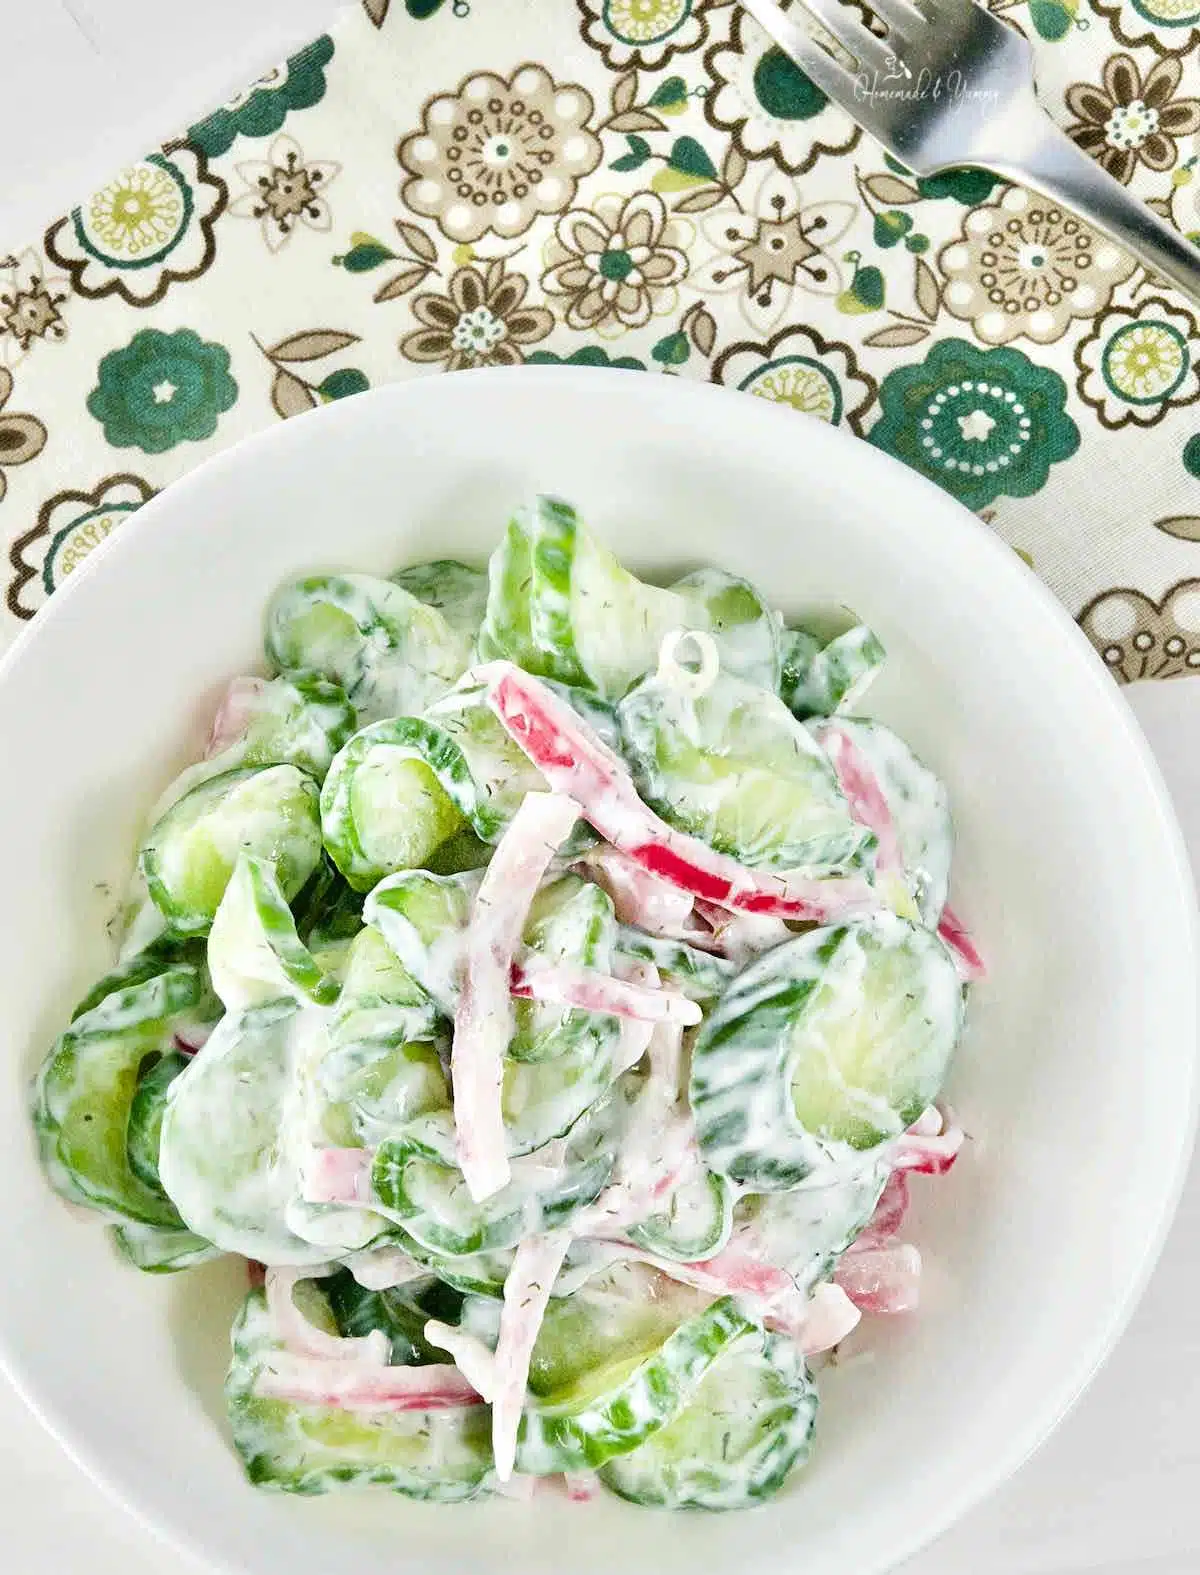 Old fashioned simple salad with cucumbers, pickled onions and sour cream.